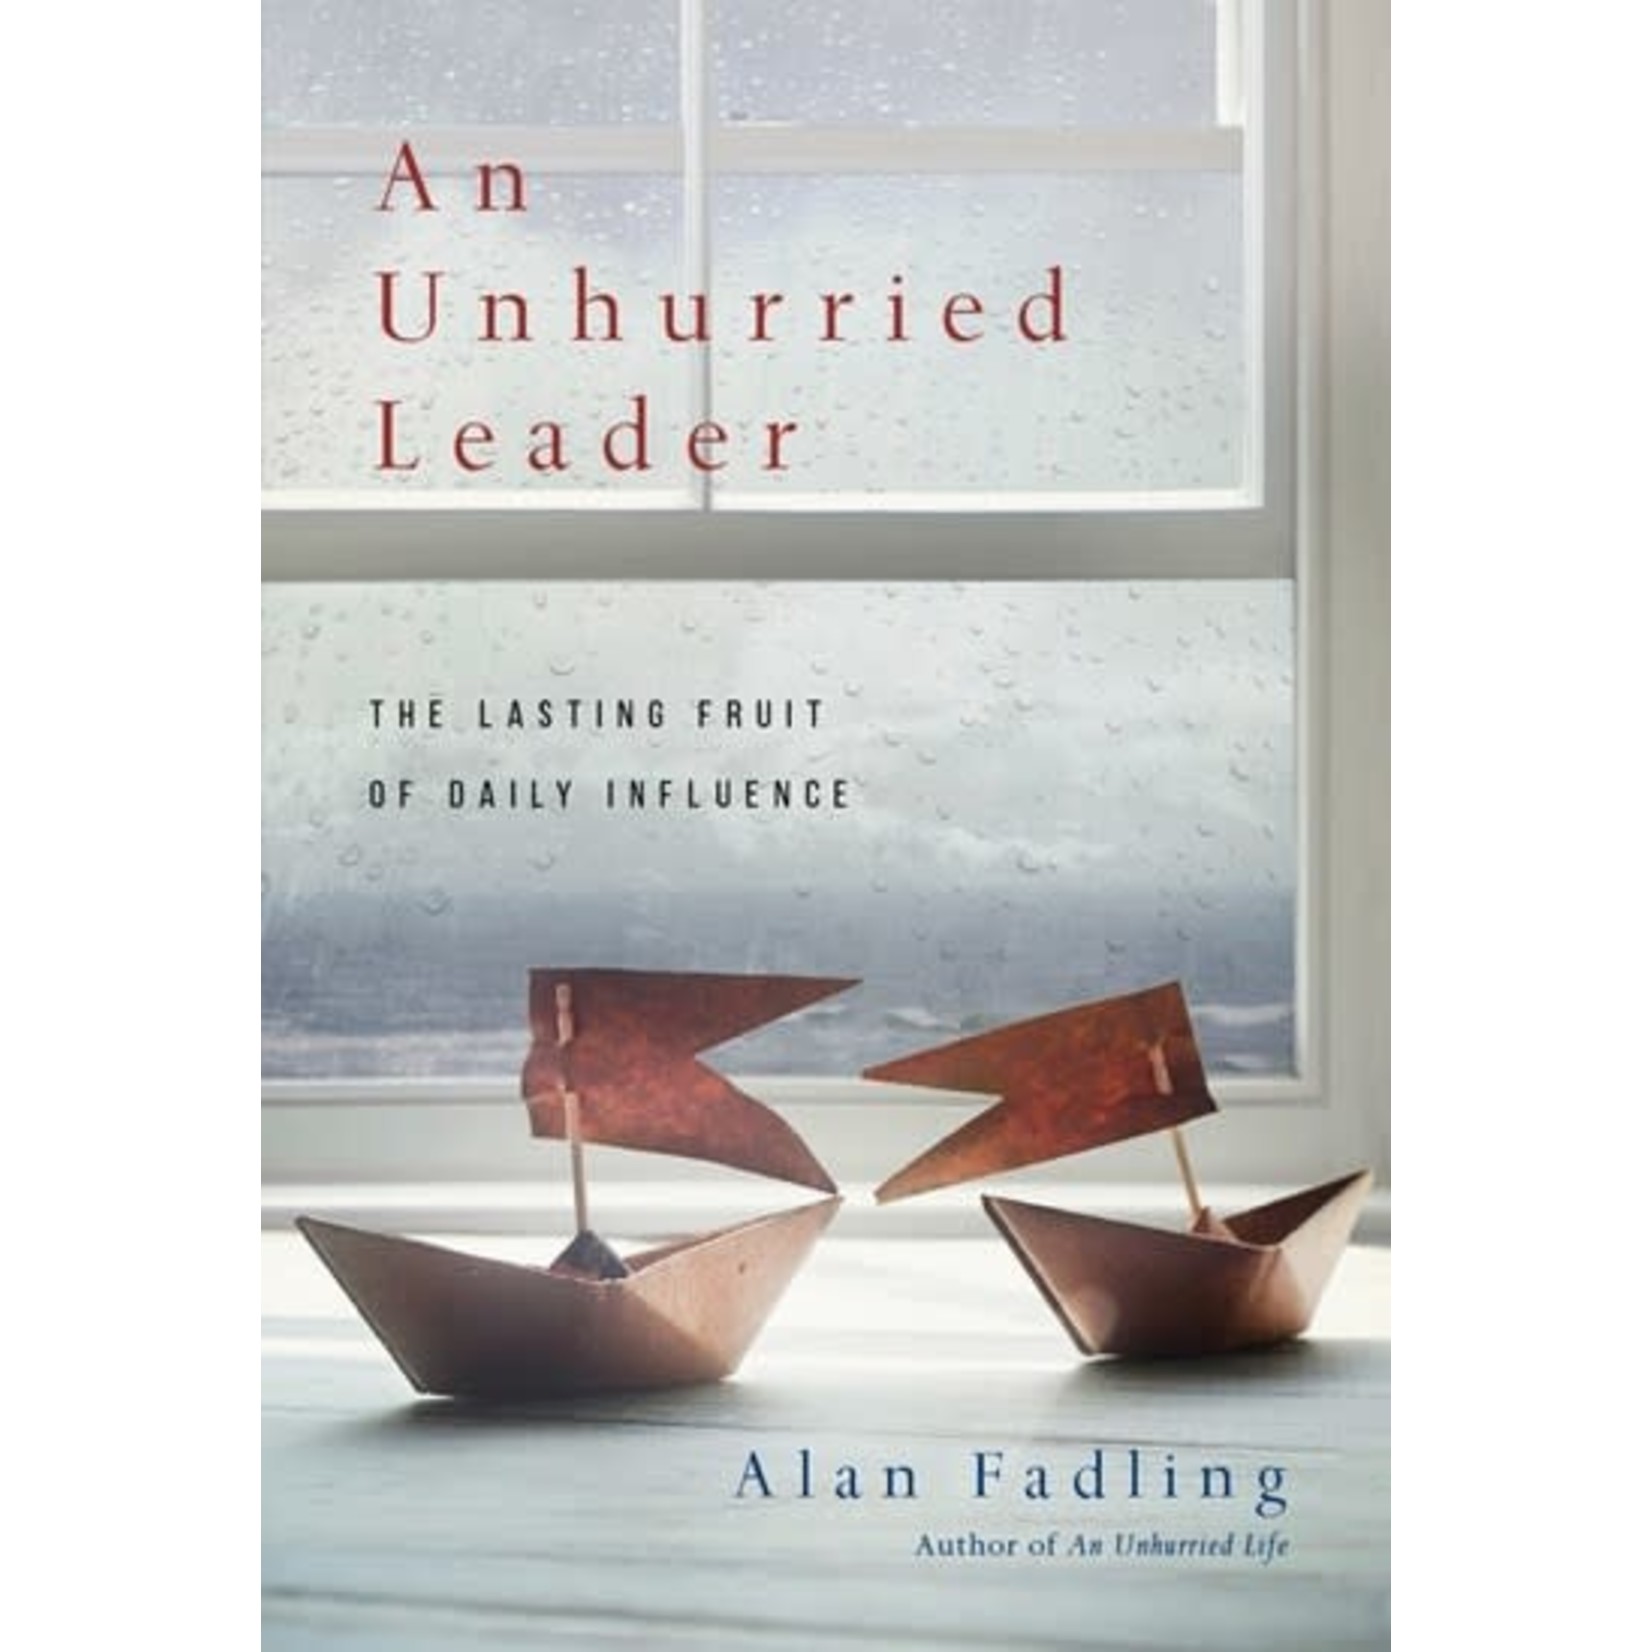 An Unhurried Leader: The Lasting Fruit of Daily Influence Hardcover